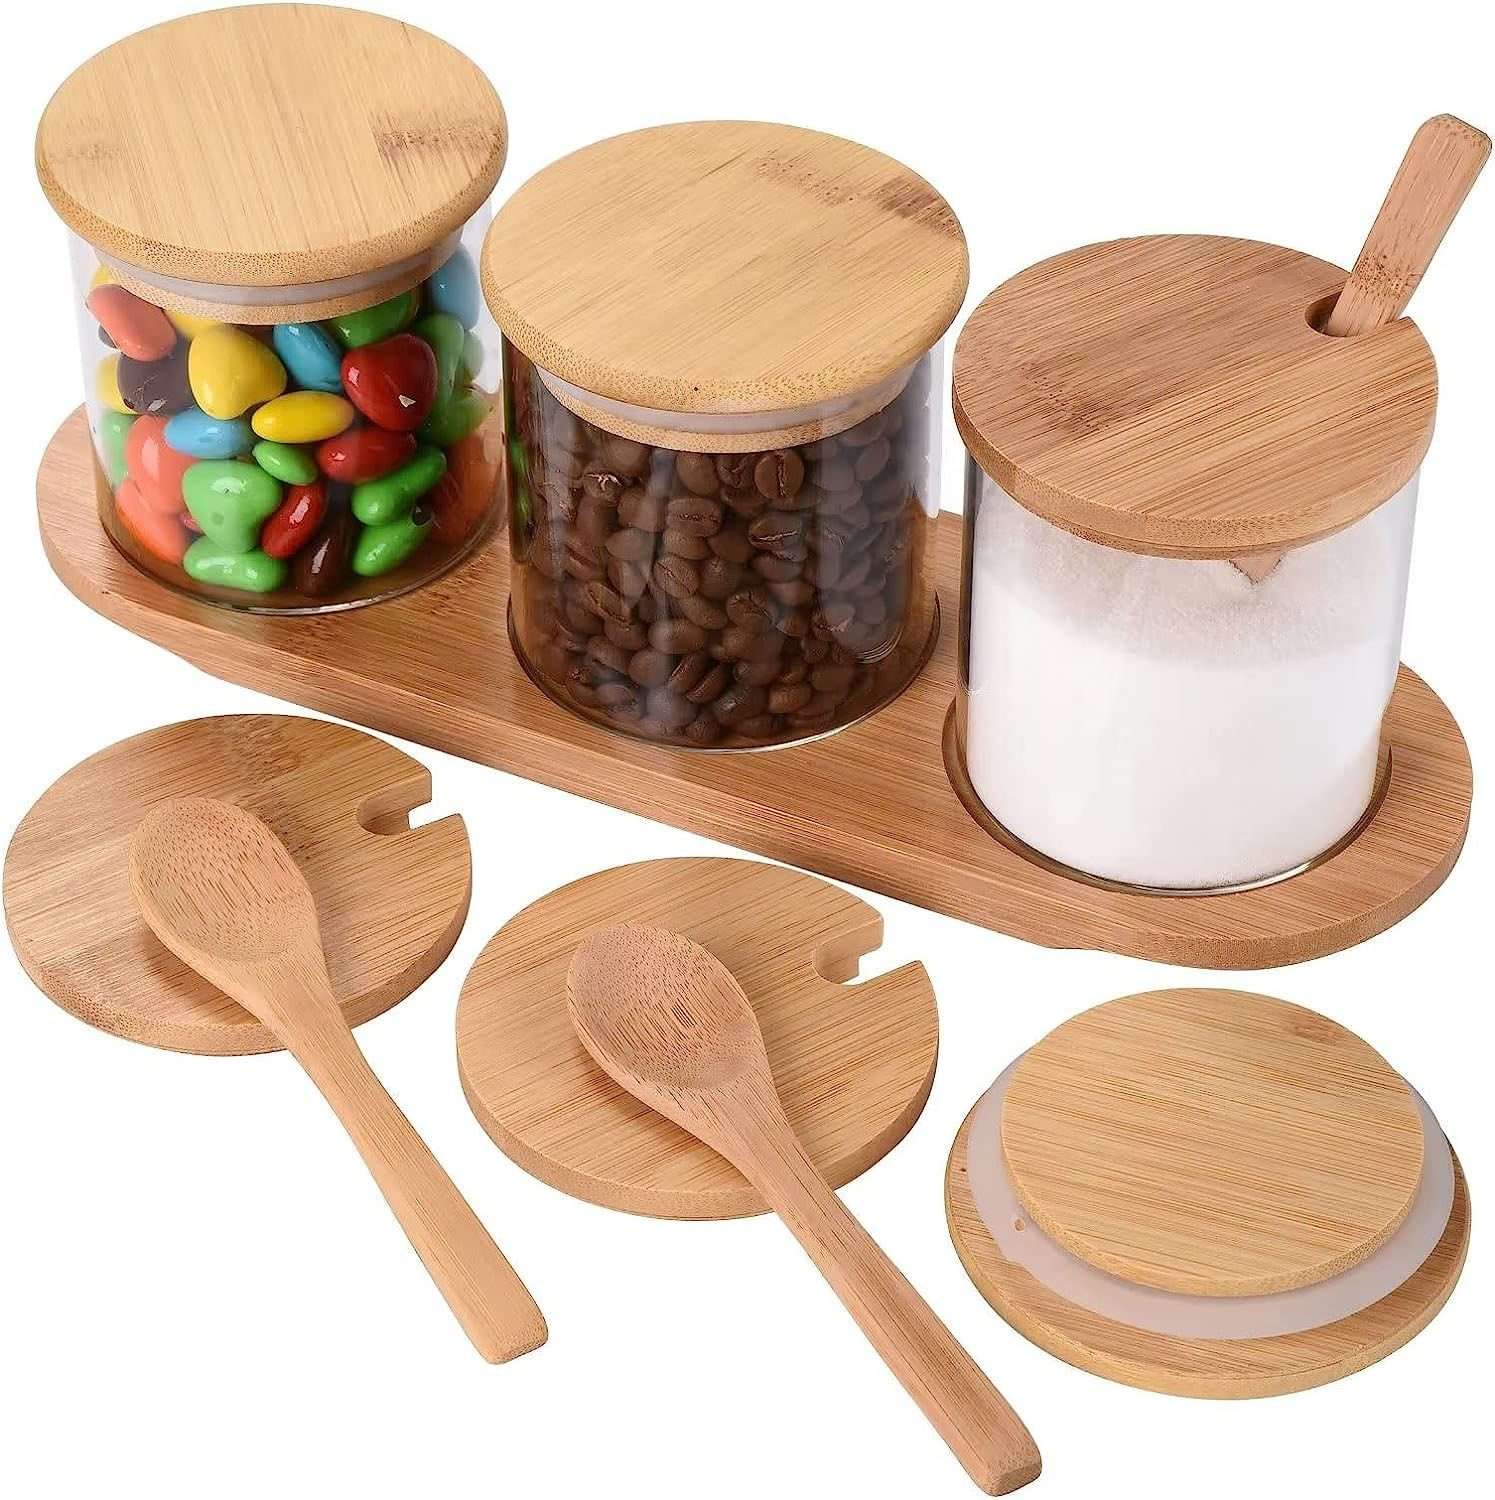 Glass Jars with Wooden Lid for Condiments | Glass jars with wooden lids wholesale